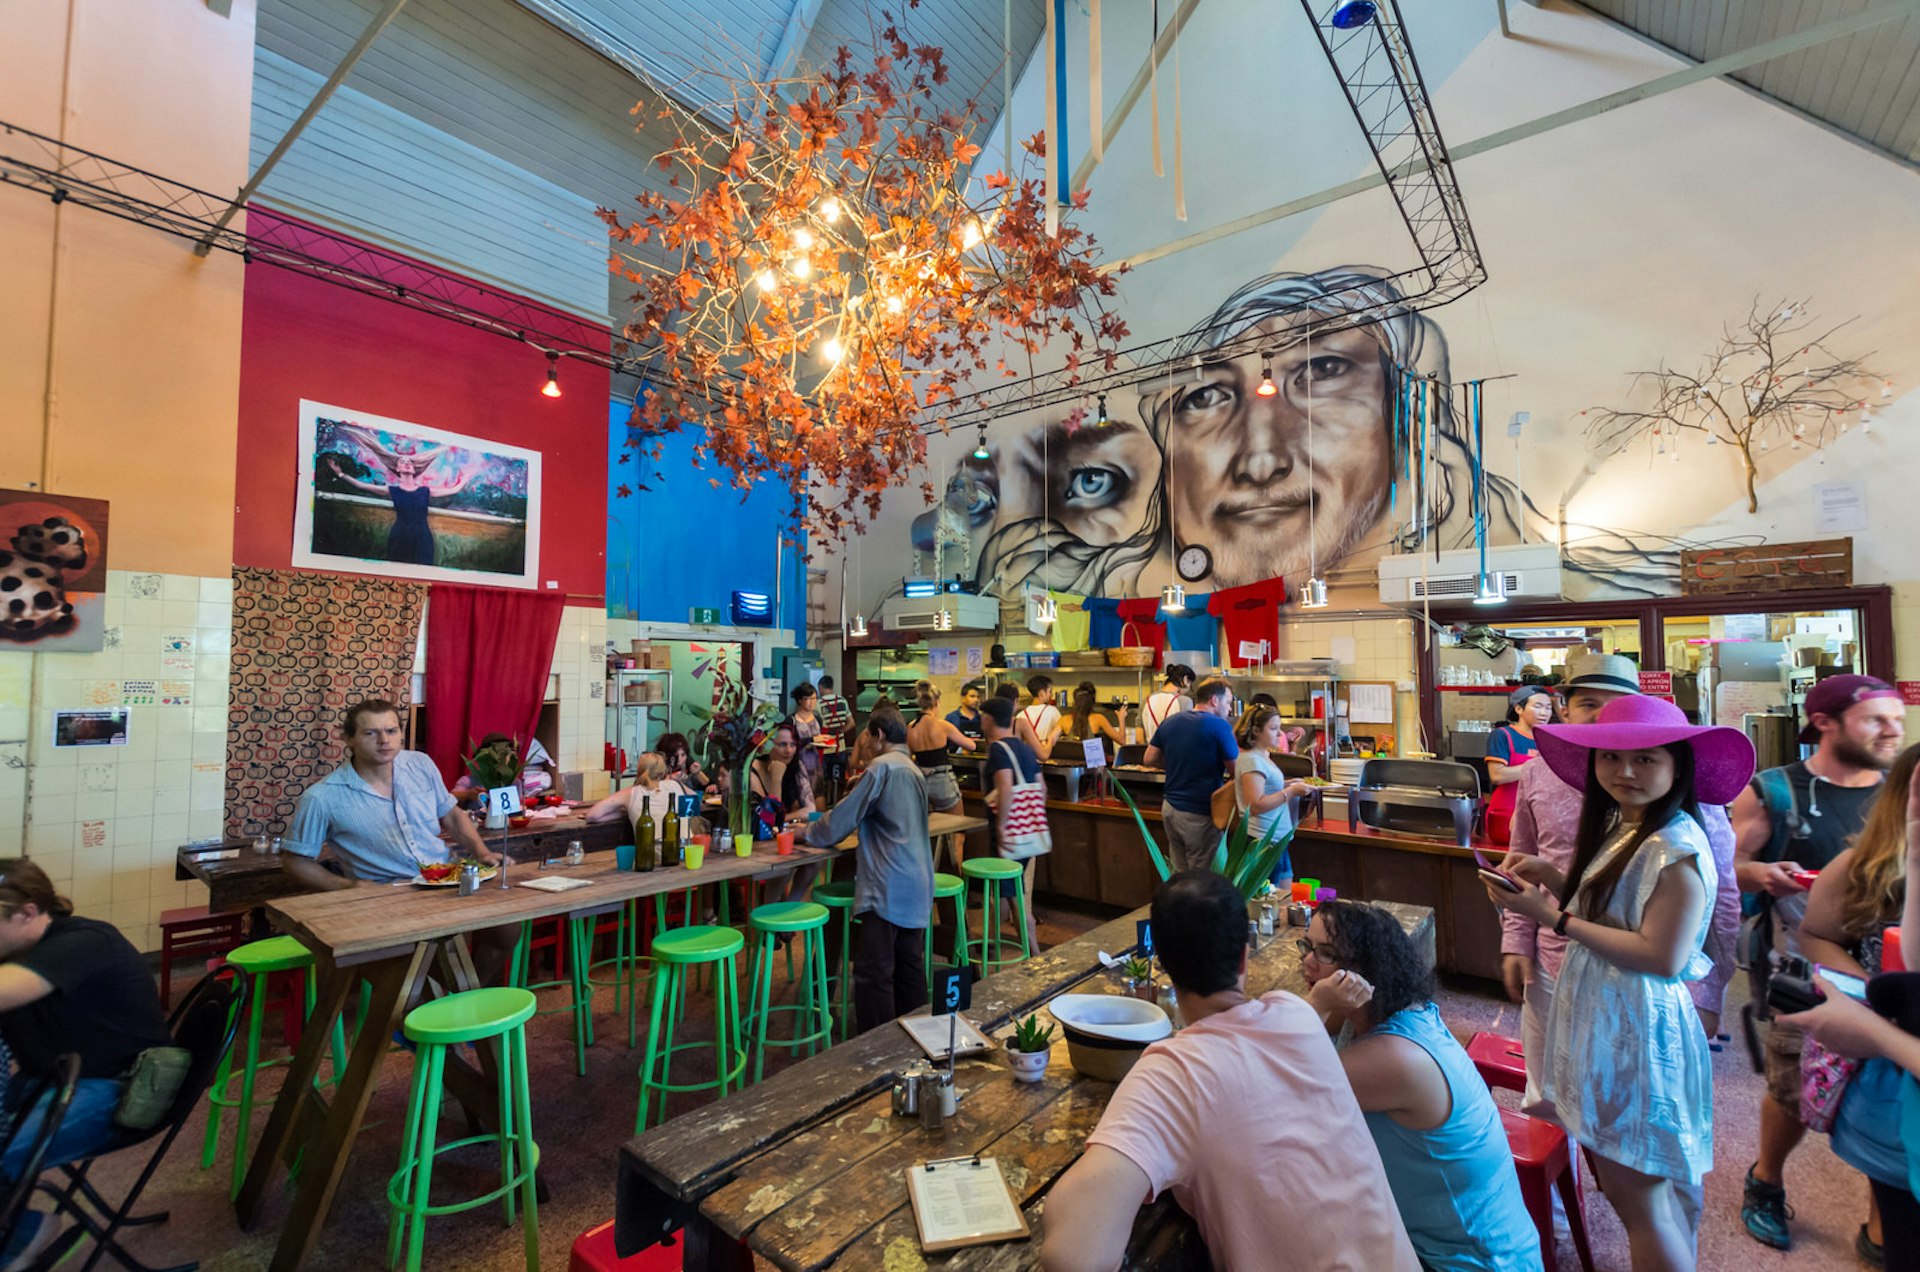 Lentil as Anything, a not-for-profit community restaurant in Melbourne, Australia